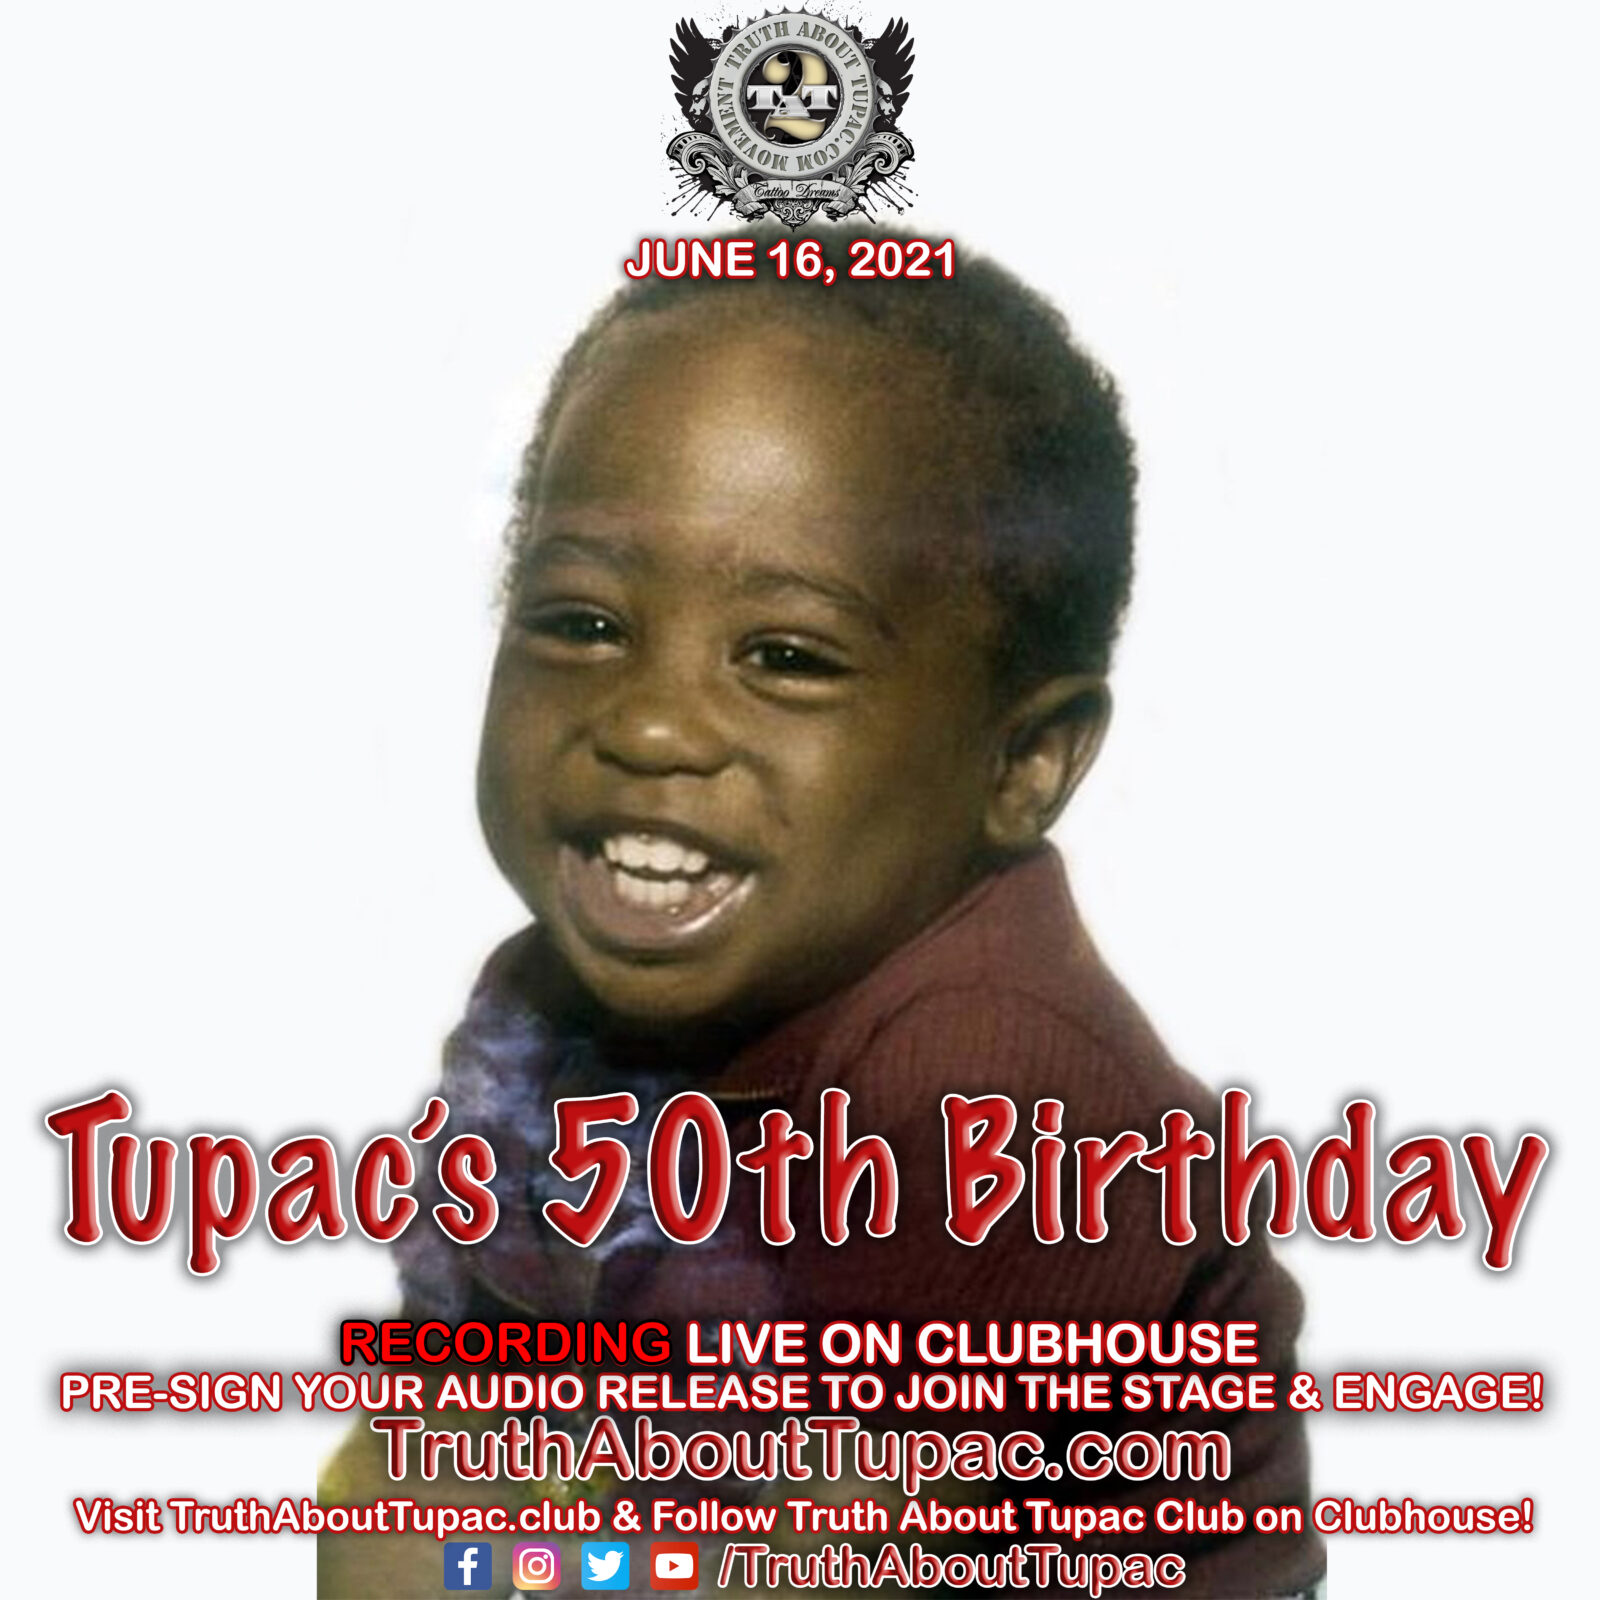 2Pac's 50th Birthday – Truth About Tupac